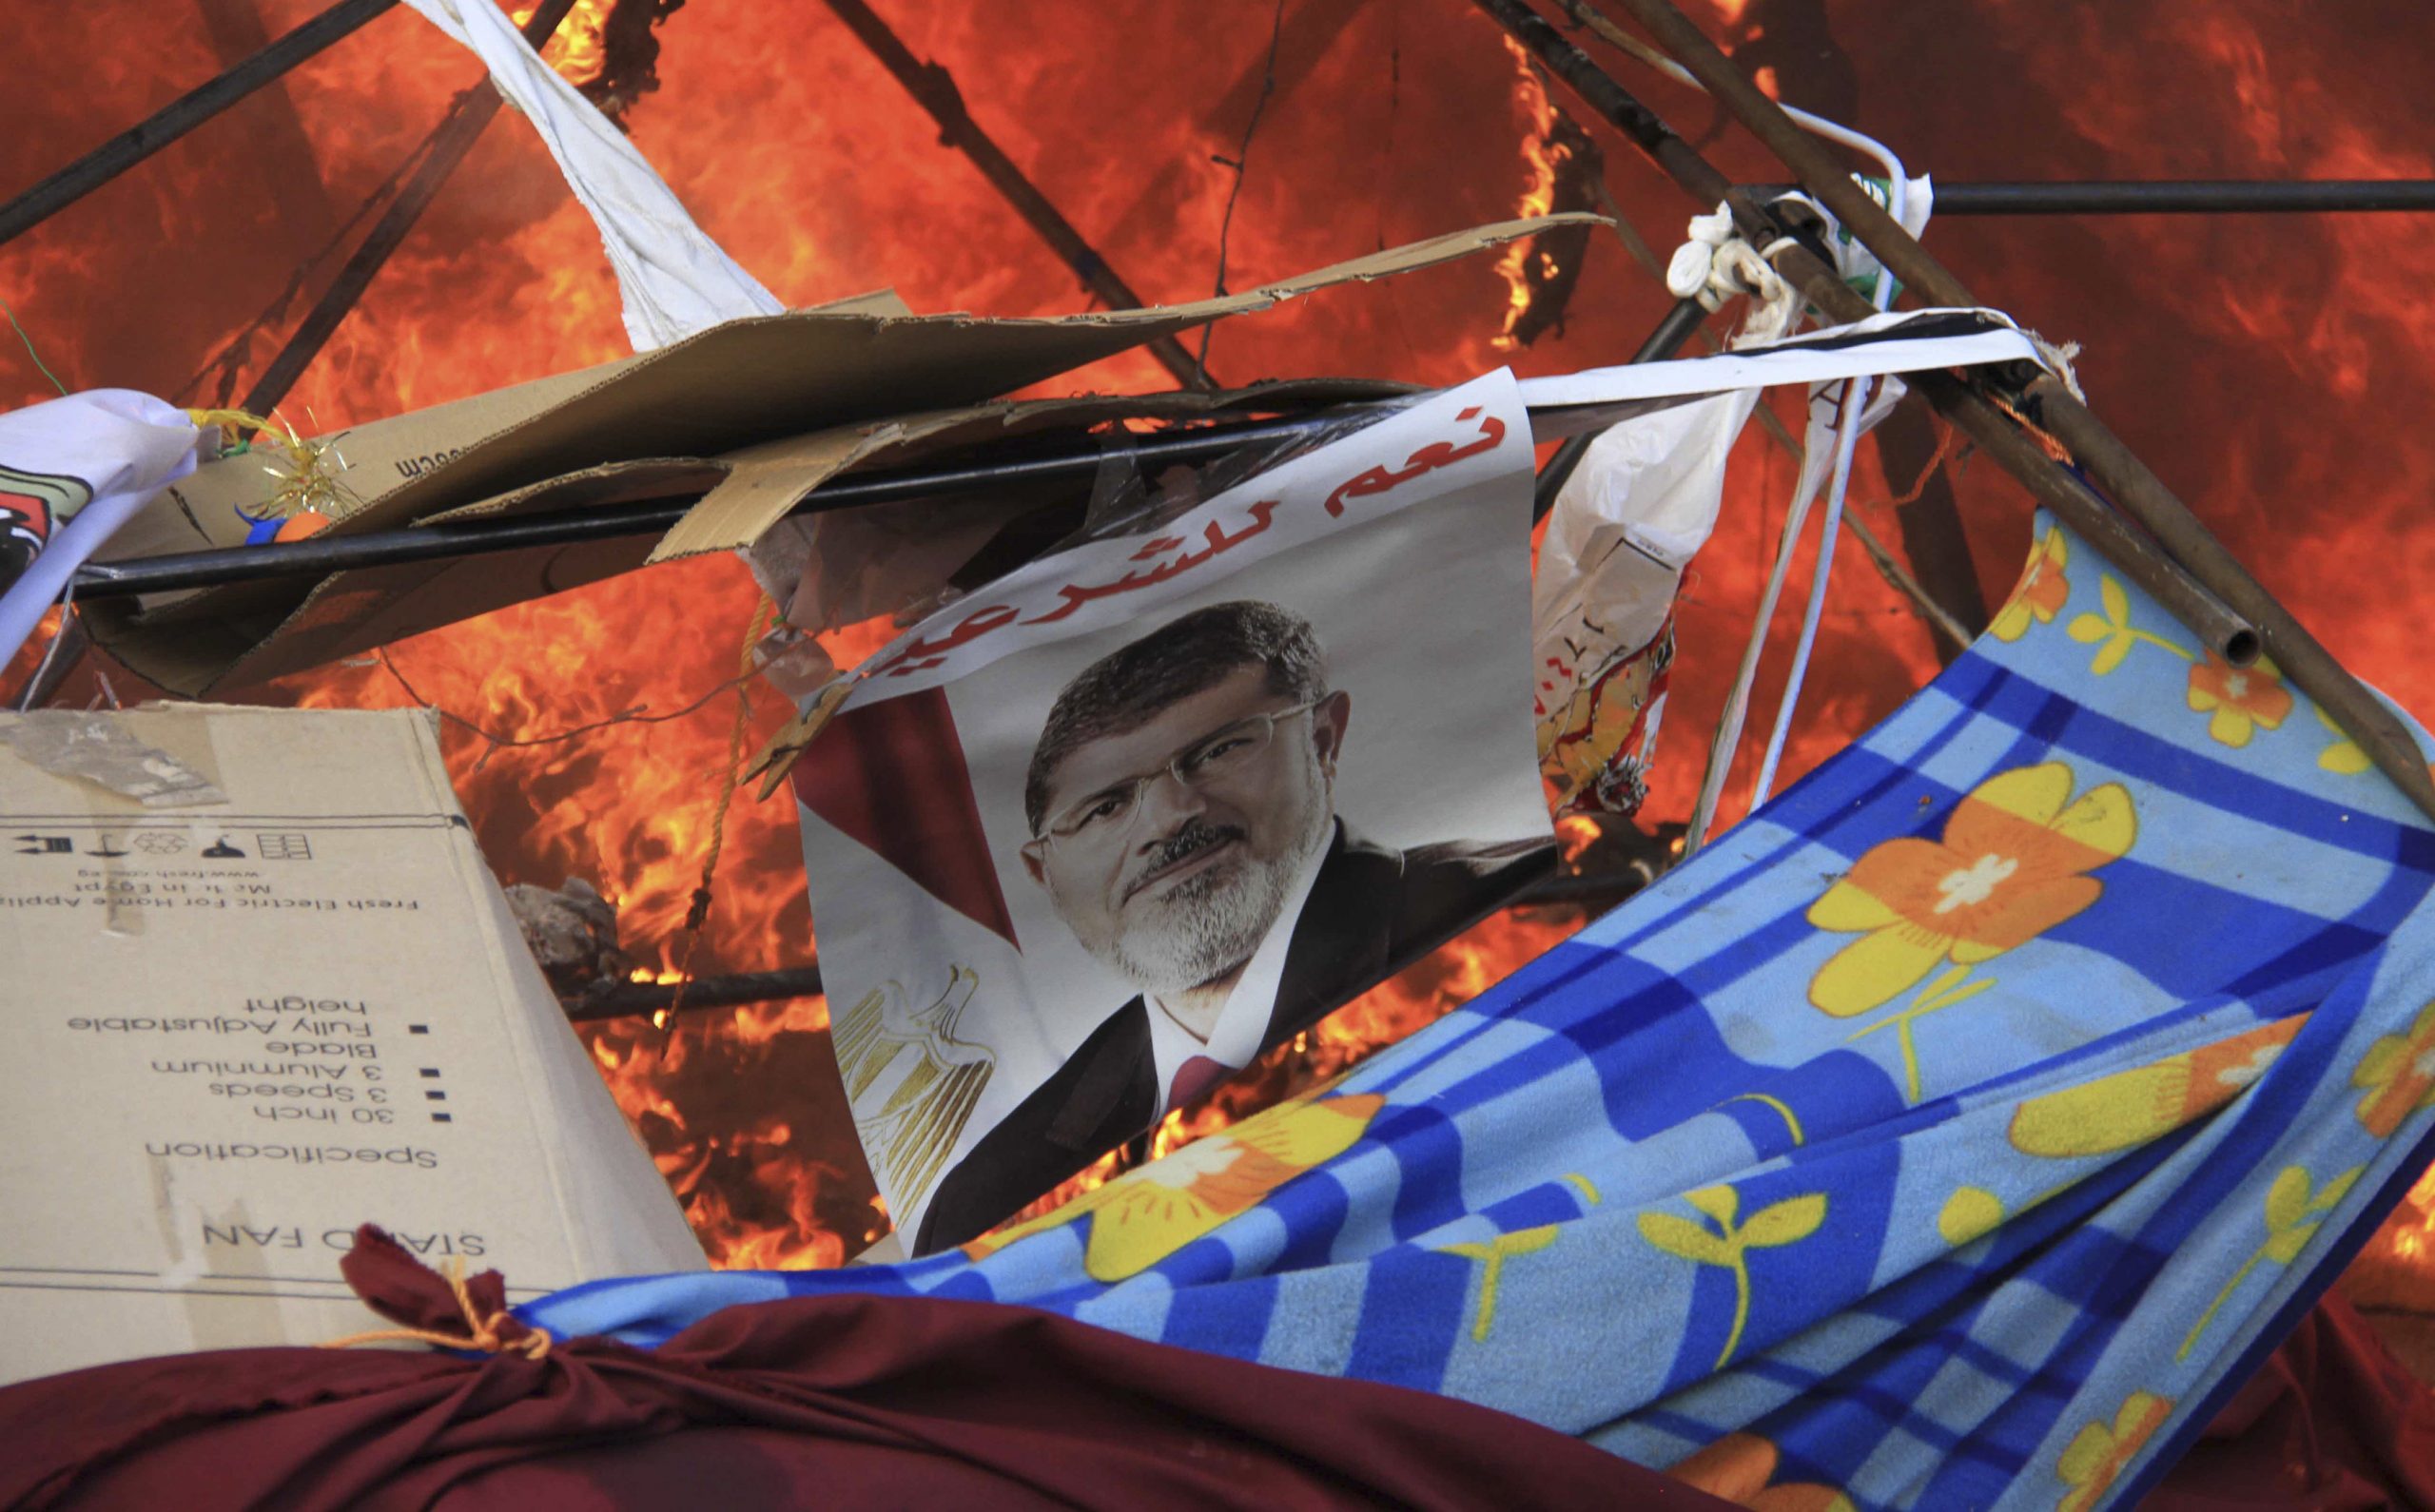 A poster of ُEgypt's former president Mohamed Morsi reads "Yes to legitimacy" as riot police clears the area of members of the Muslim Brotherhood and supporters at Rabaa Adawiya square, where they were camping, hundreds of them were killed on that single event, Cairo, 14 August 2013. Reuters, Stringer.